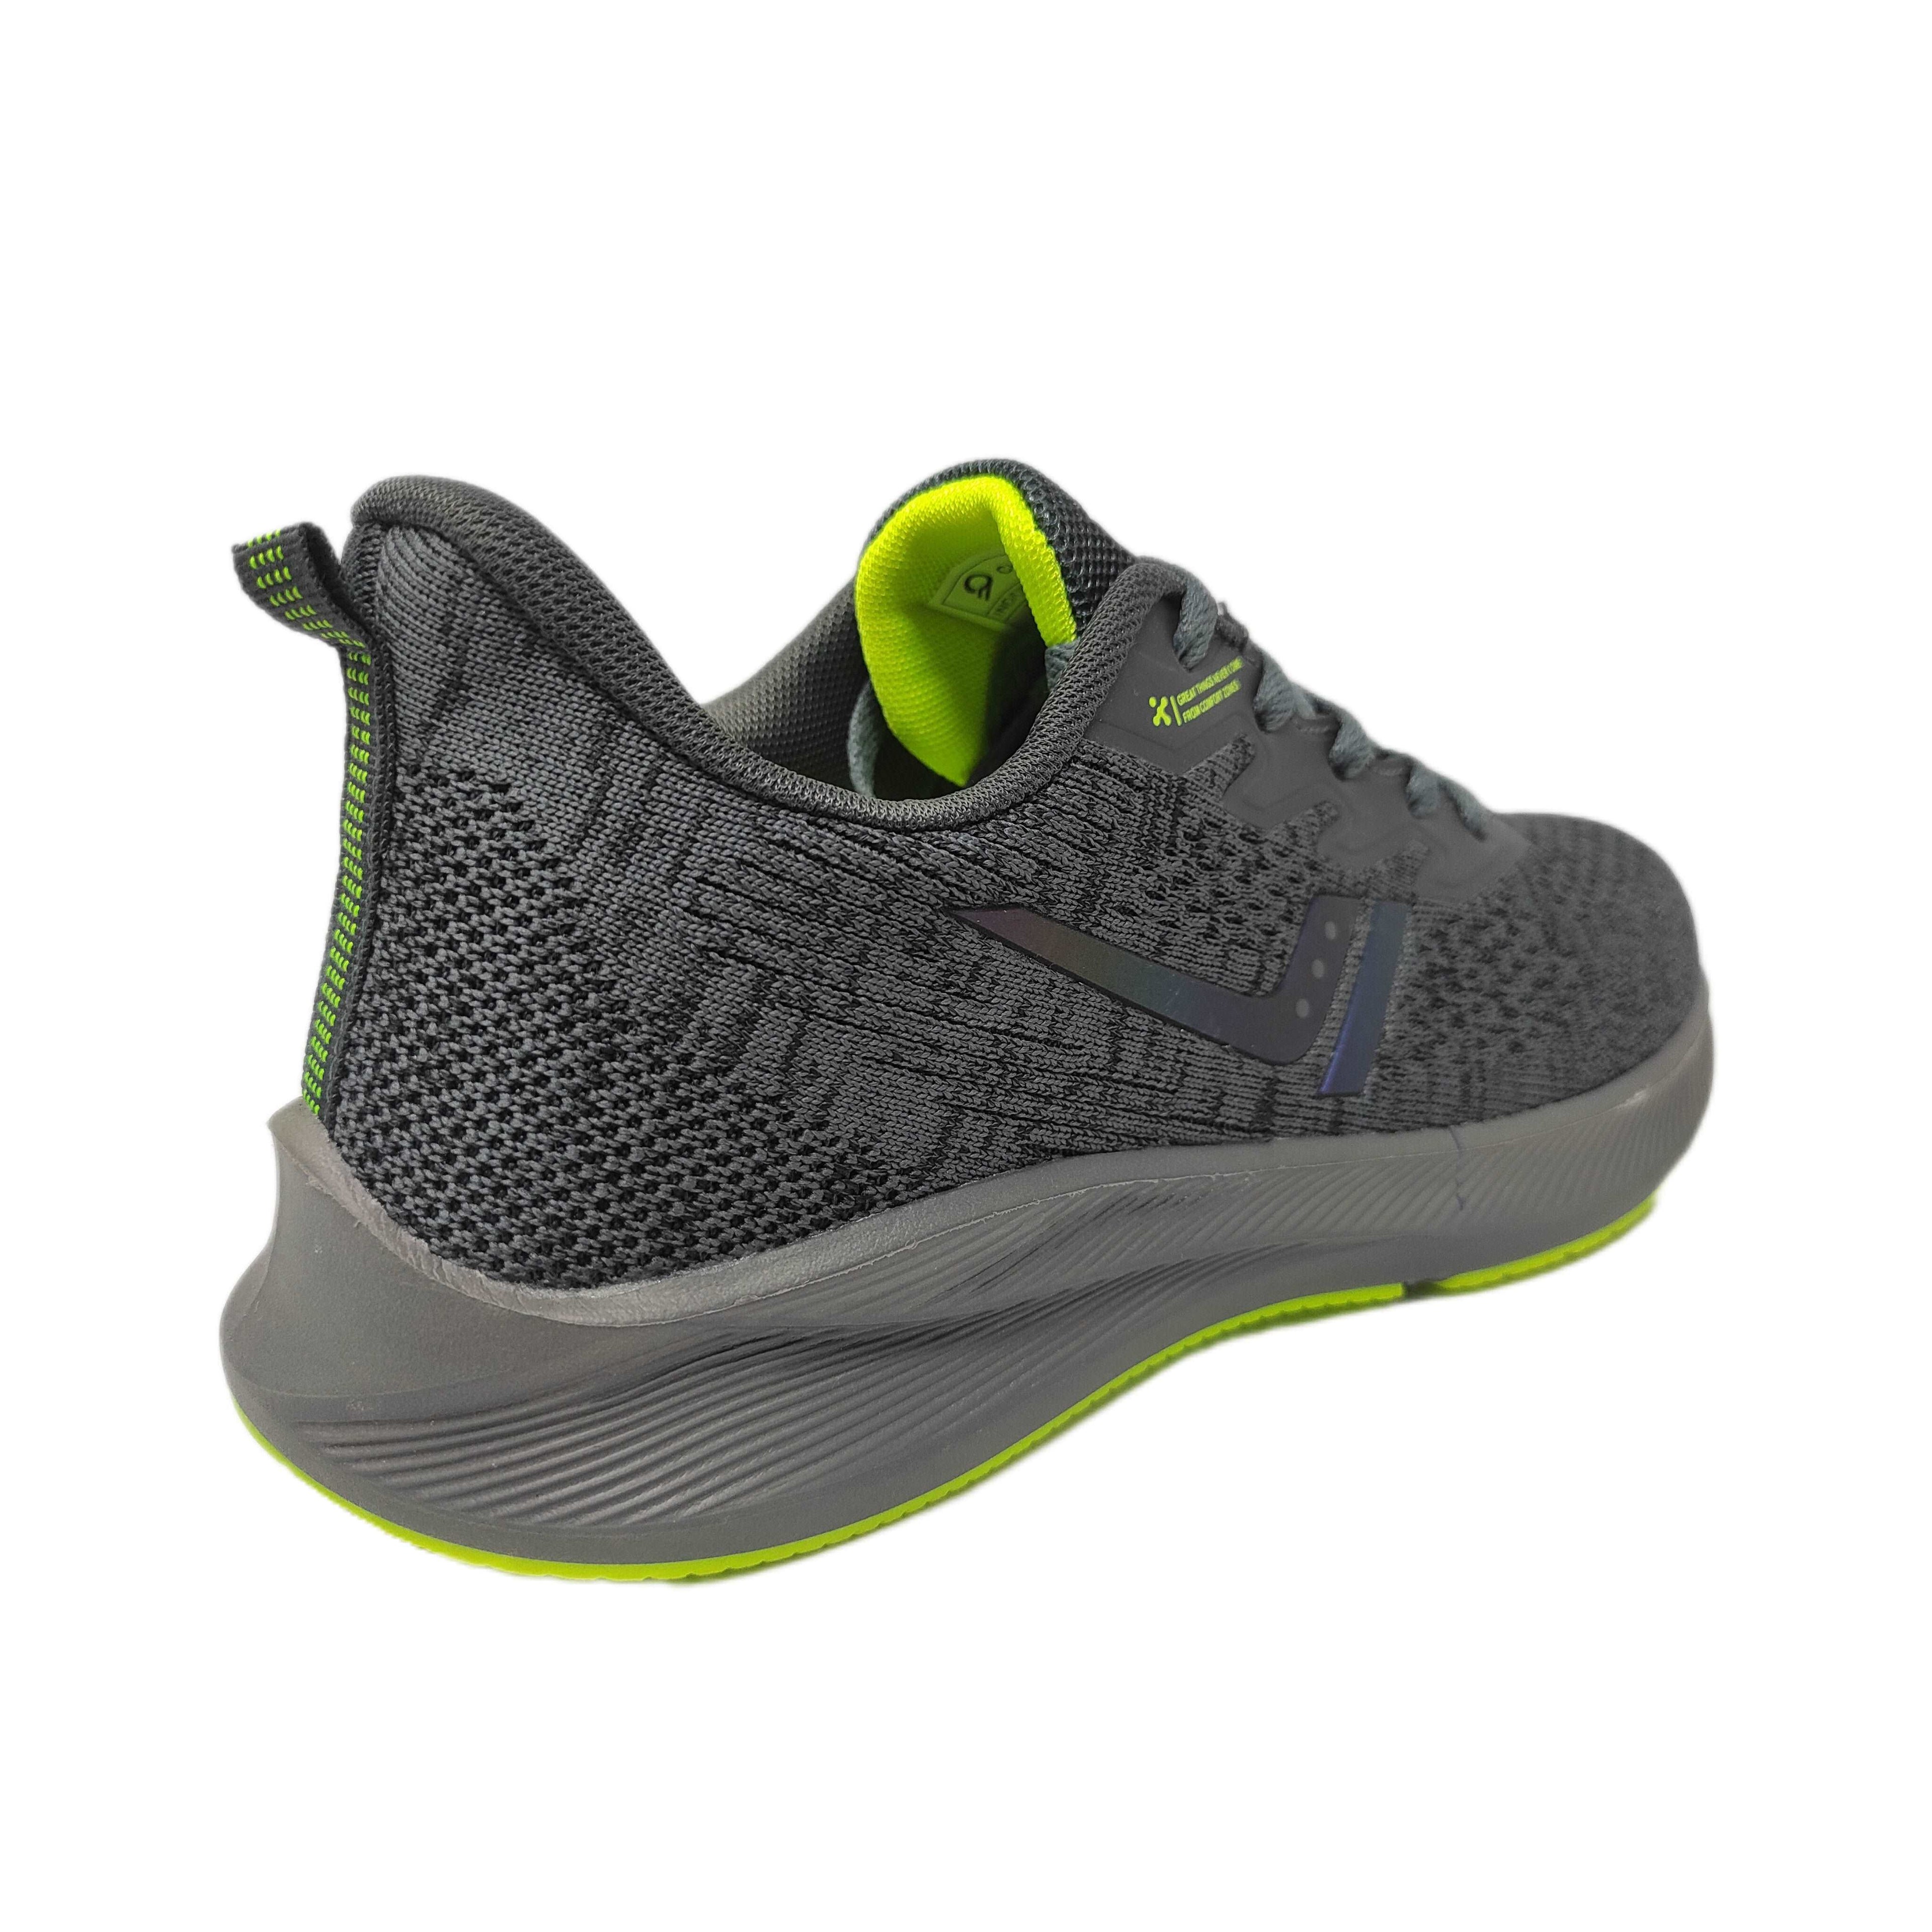 Calcetto CLT-0964 D Grey Lime Running Sports Shoe For Men